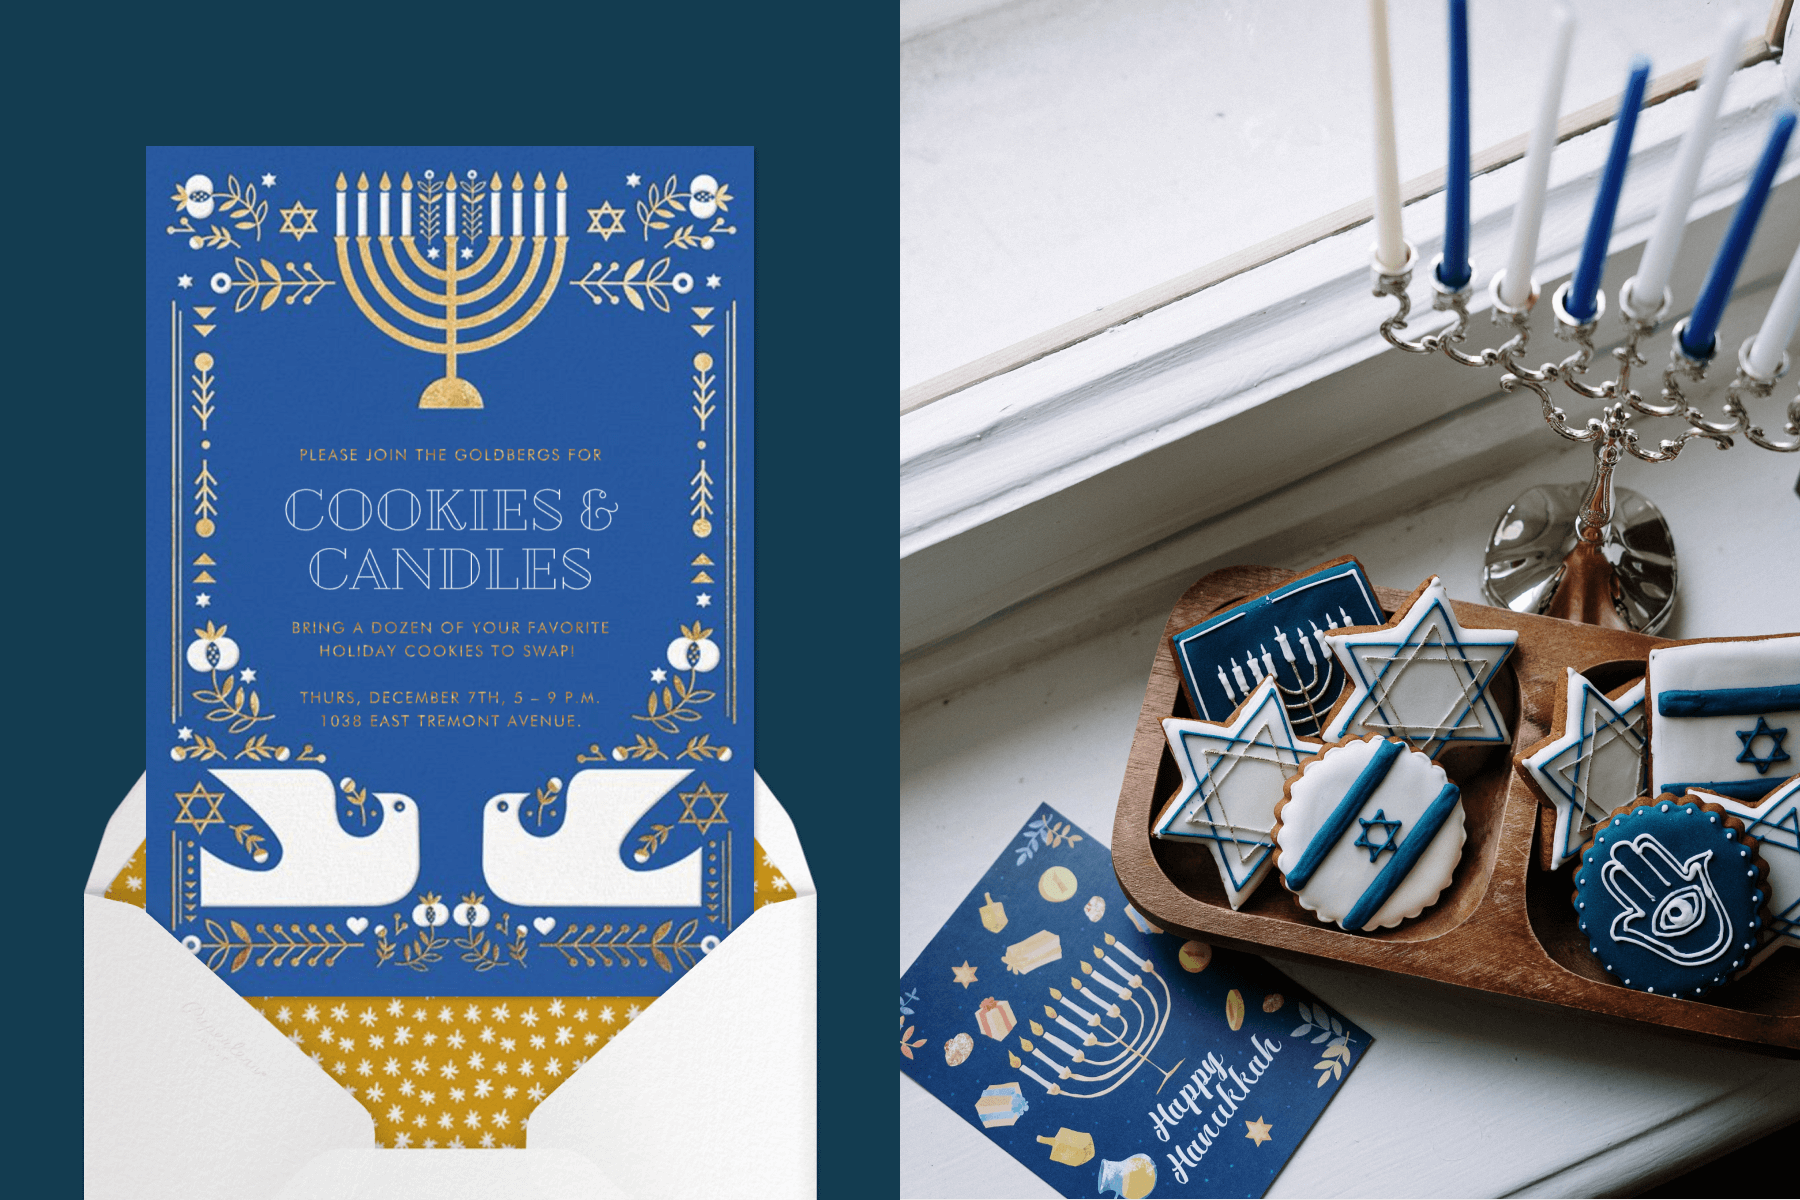 Left: A blue Hanukkah card and white envelope. Right: Blue and white Hanukkah cookies, a Hanukkah card, and a Chanukiah with candles.